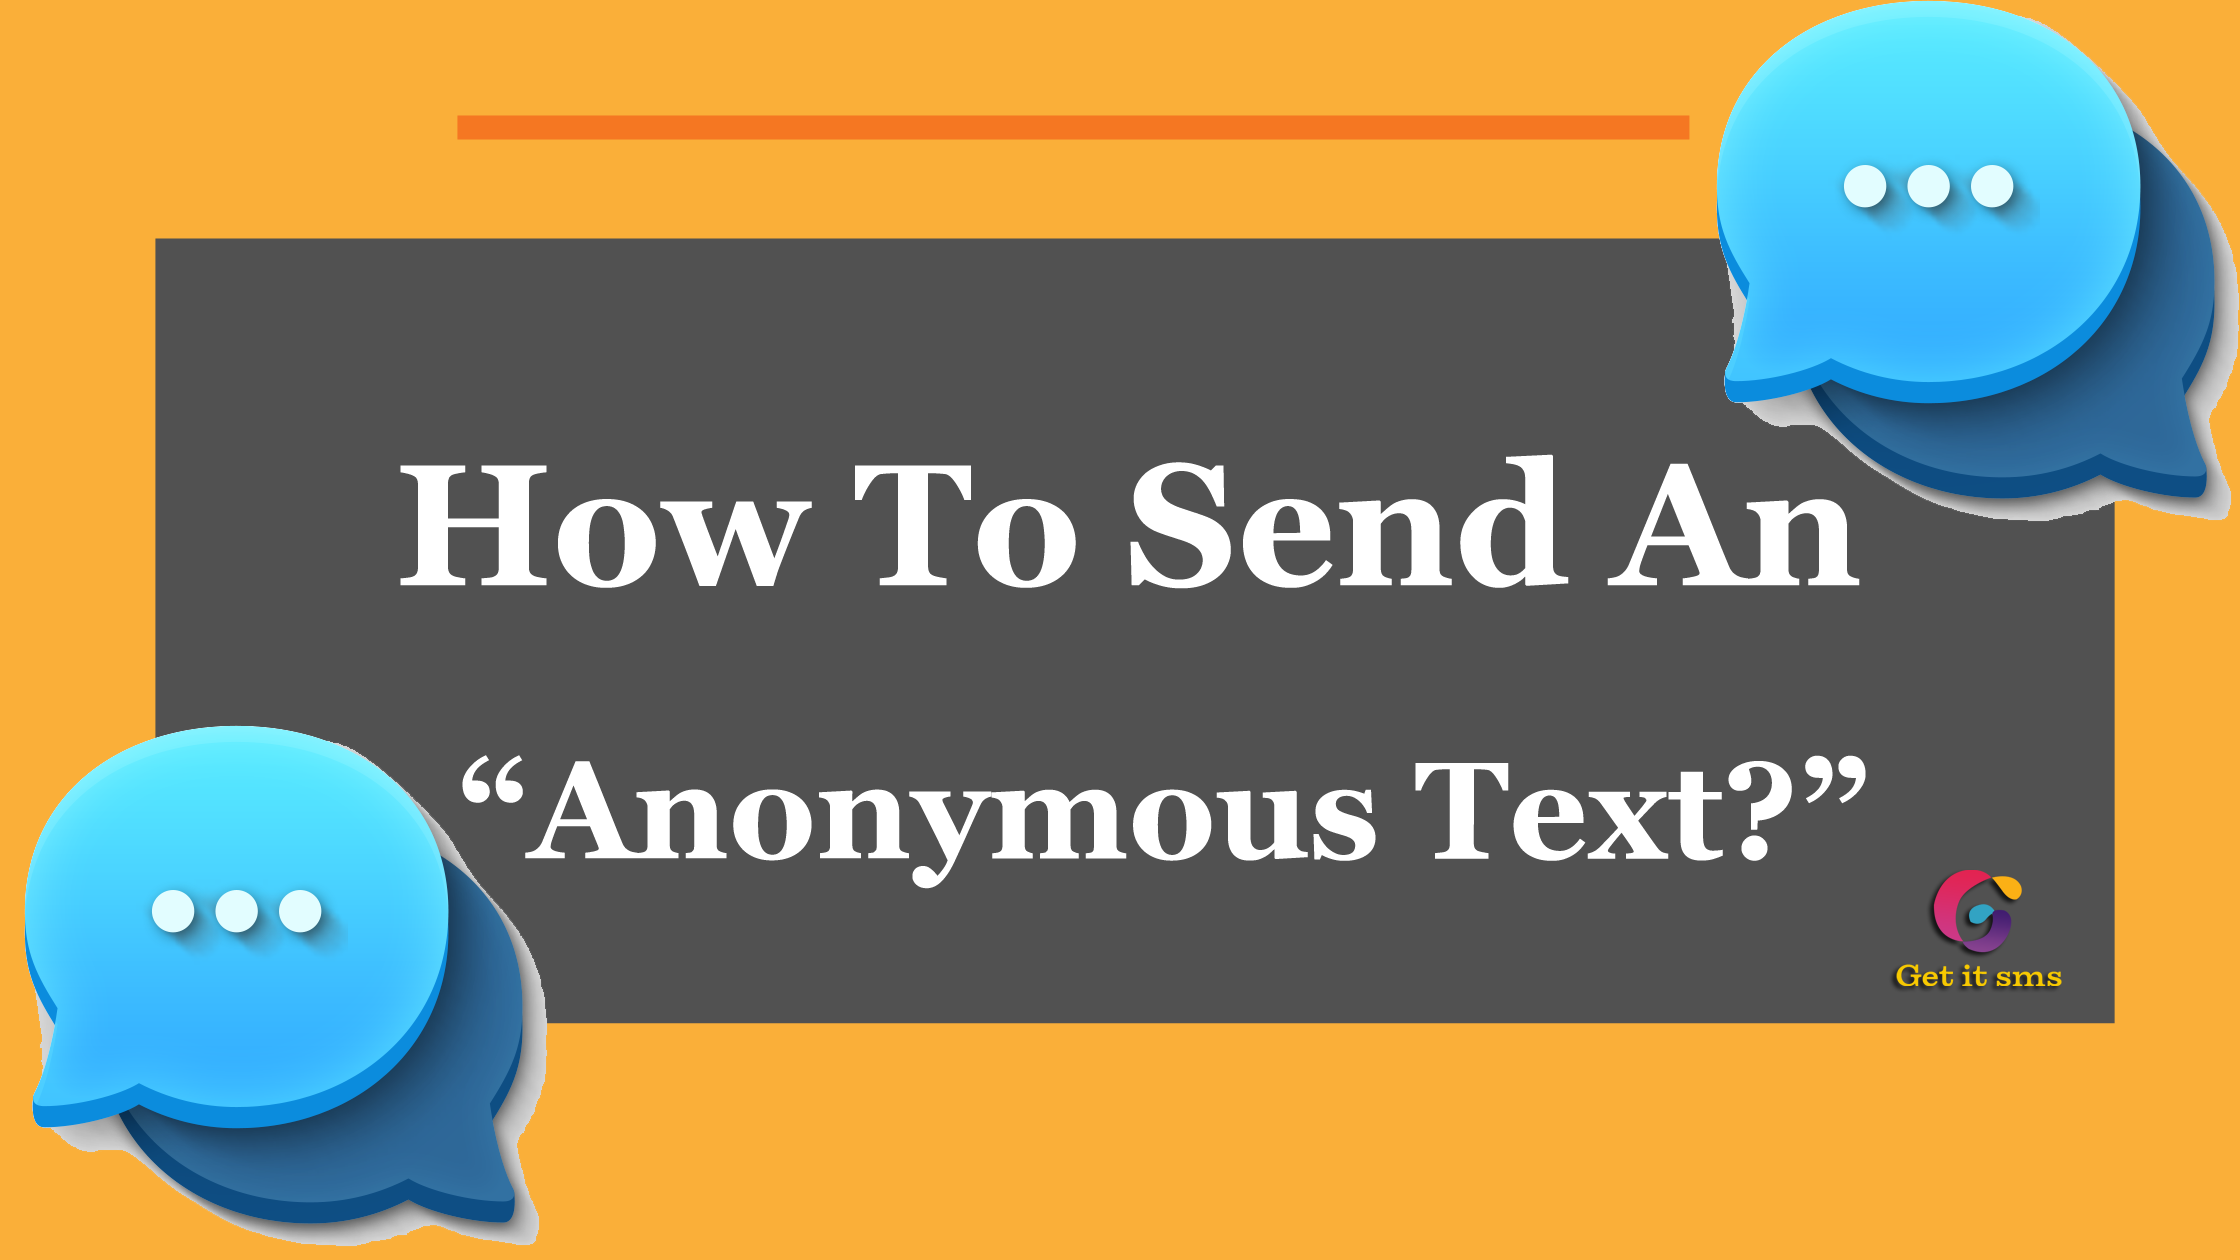 How to Send An Anonymous Text?